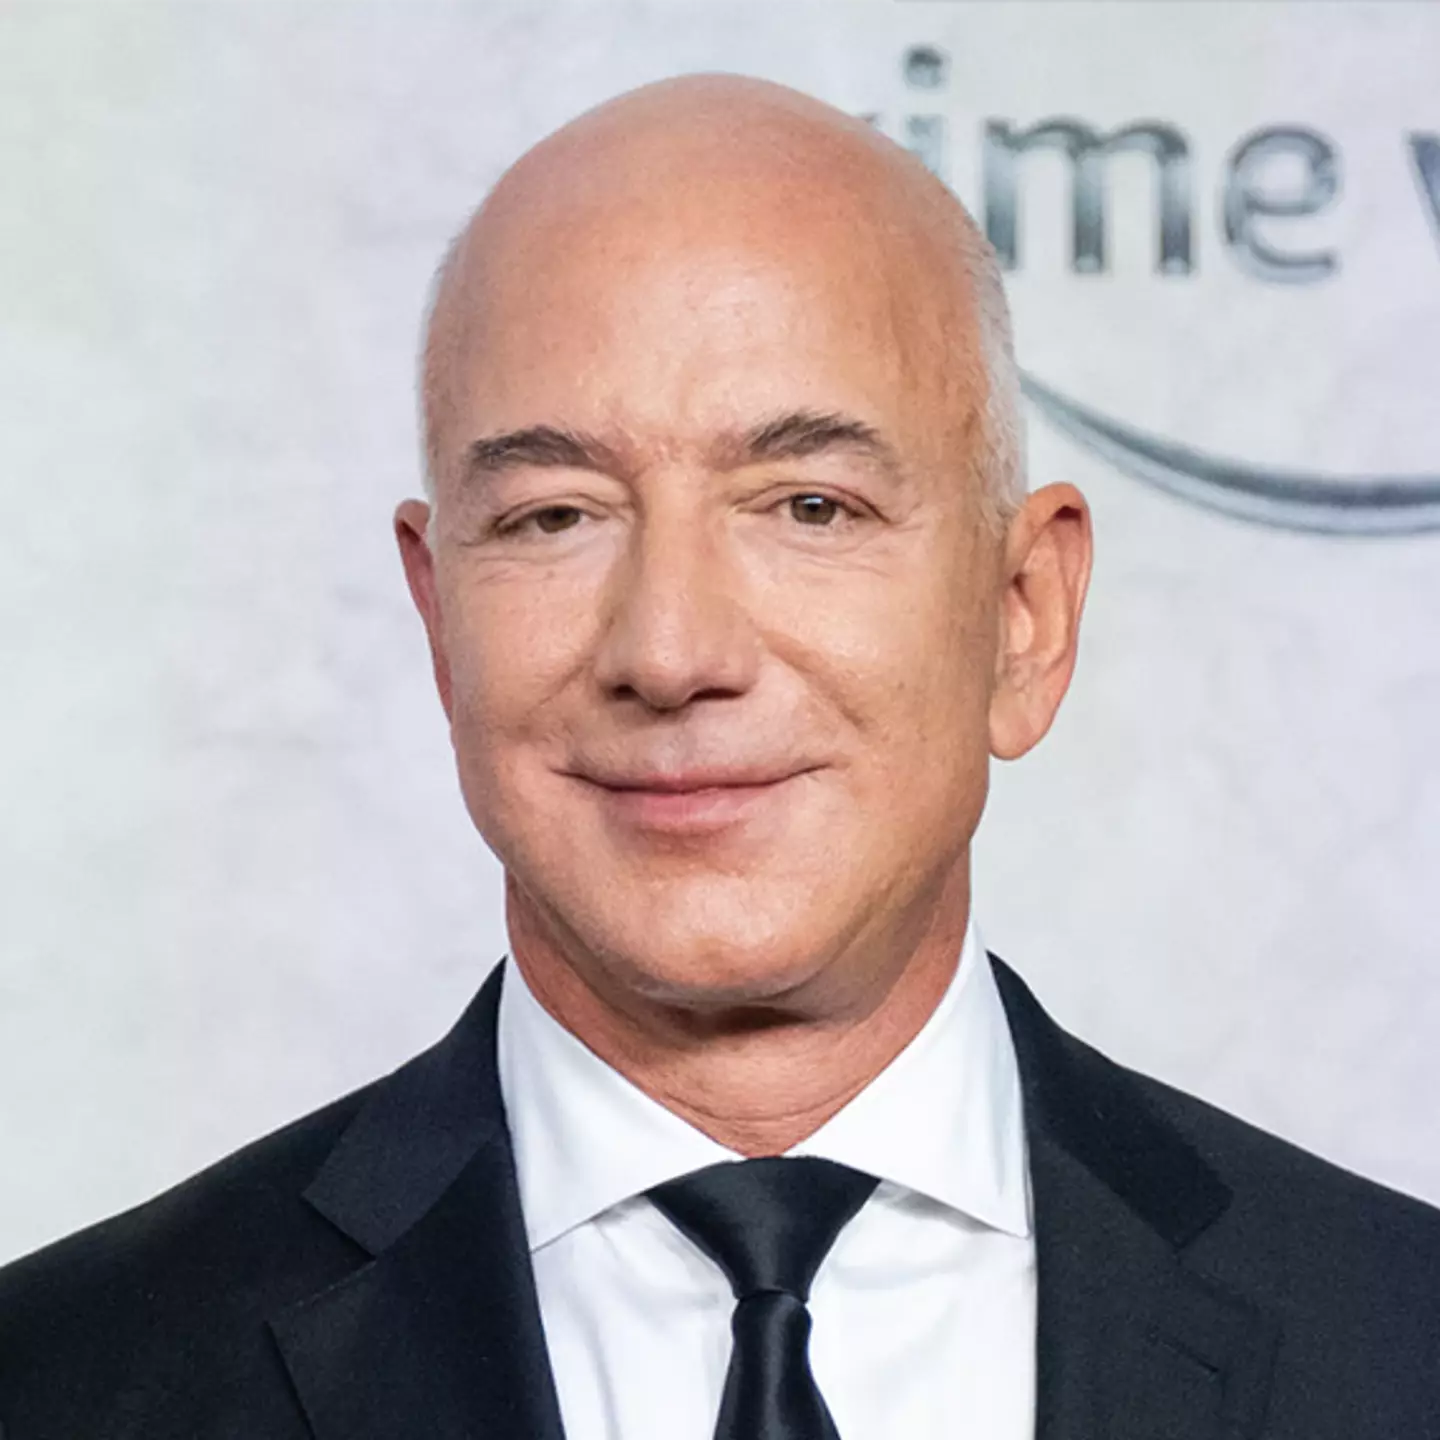 The 3 questions Jeff Bezos asks himself before hiring any candidate